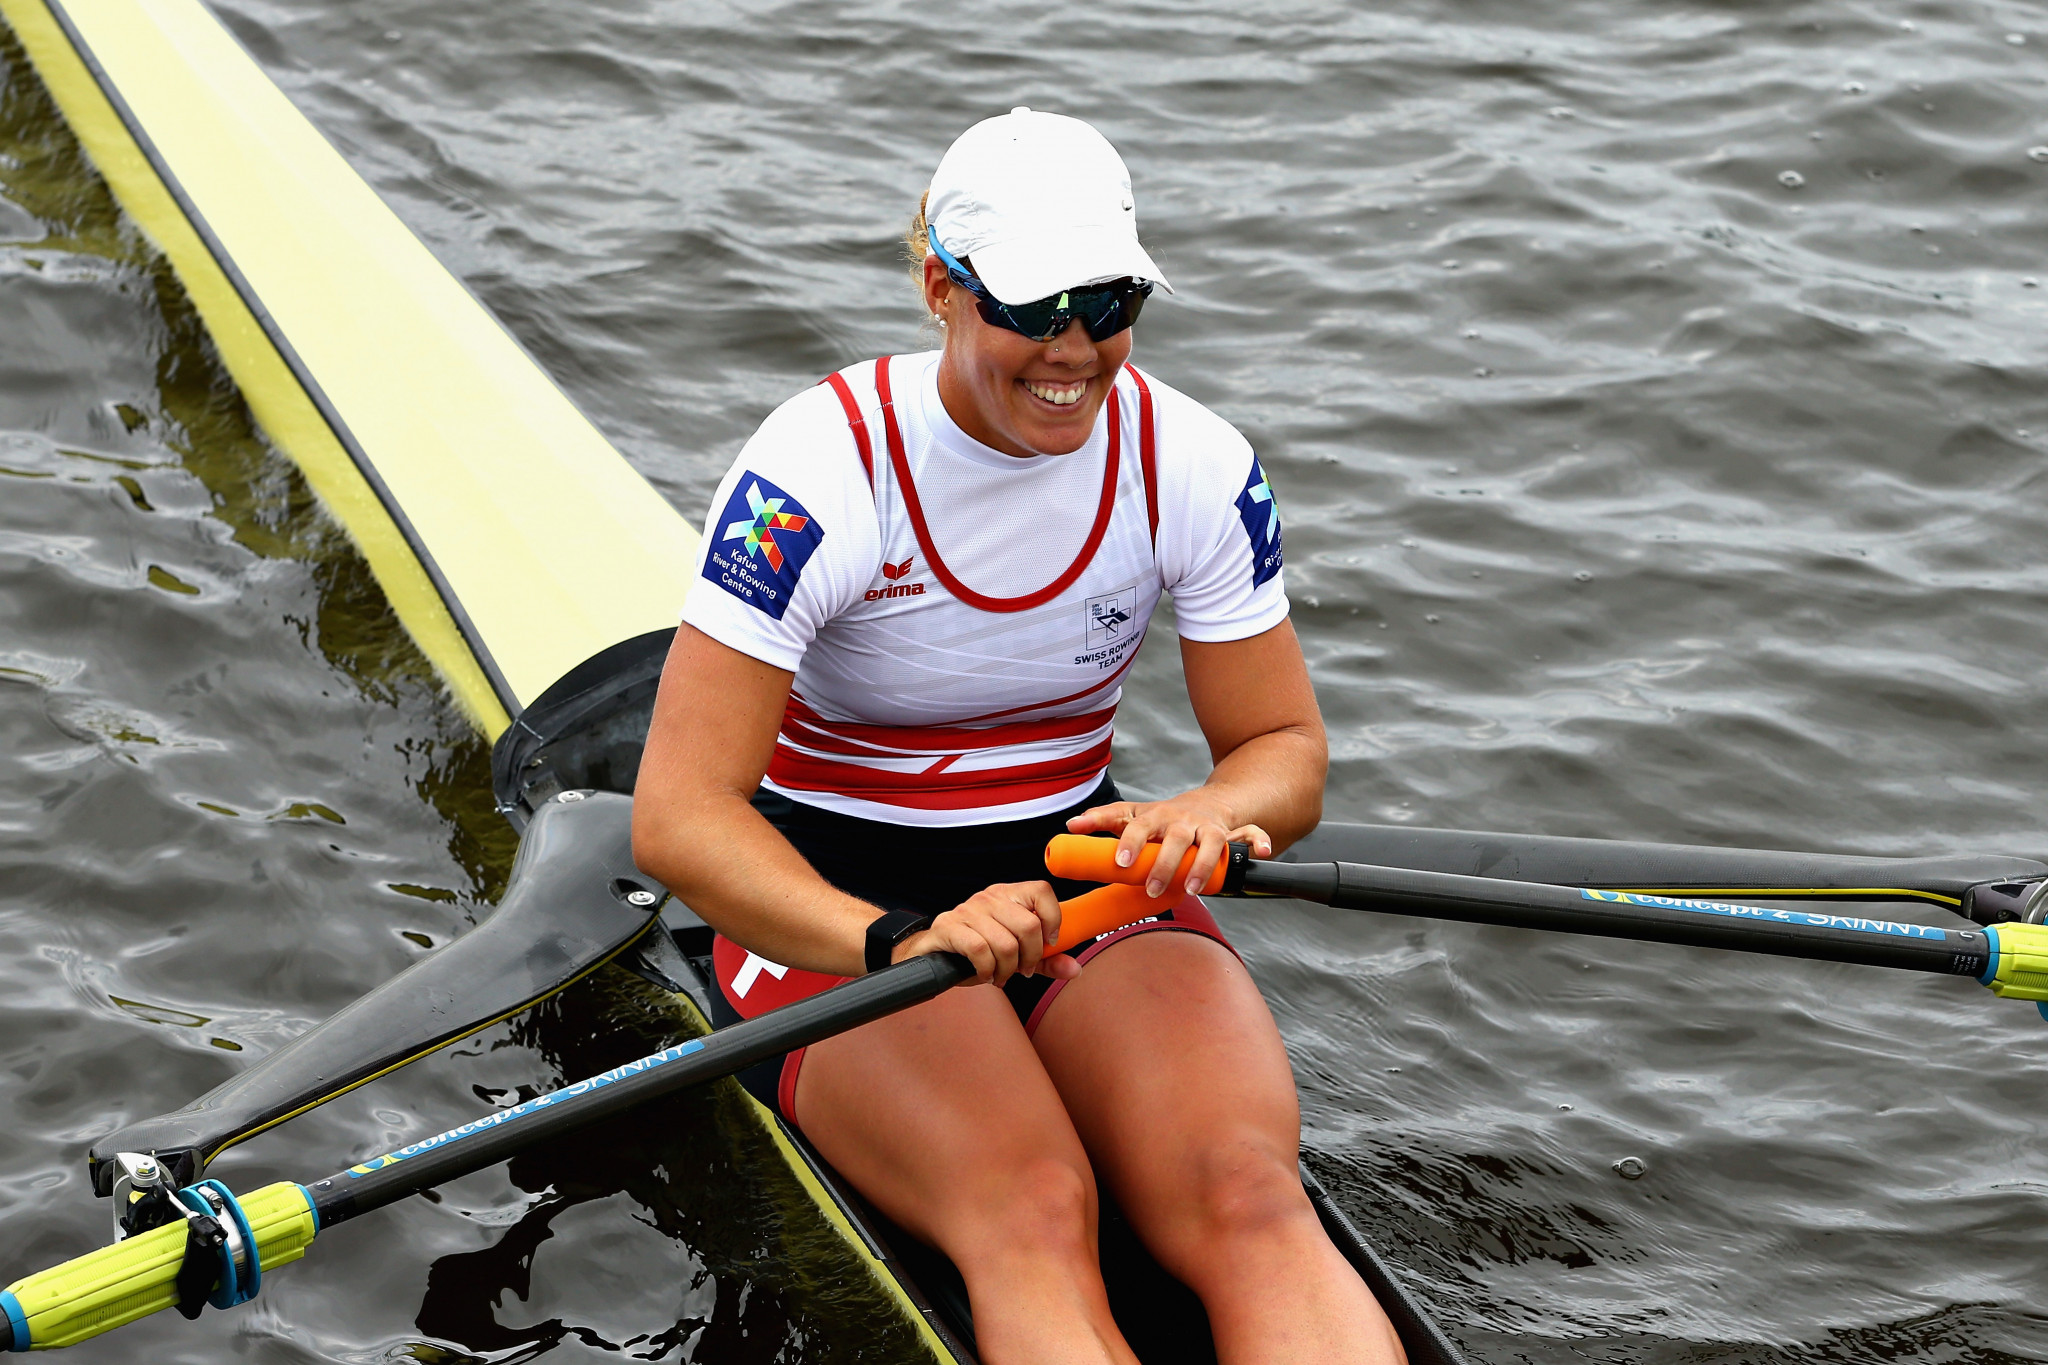 Defending champion Gmelin aiming to delight home crowd at European Rowing Championships 